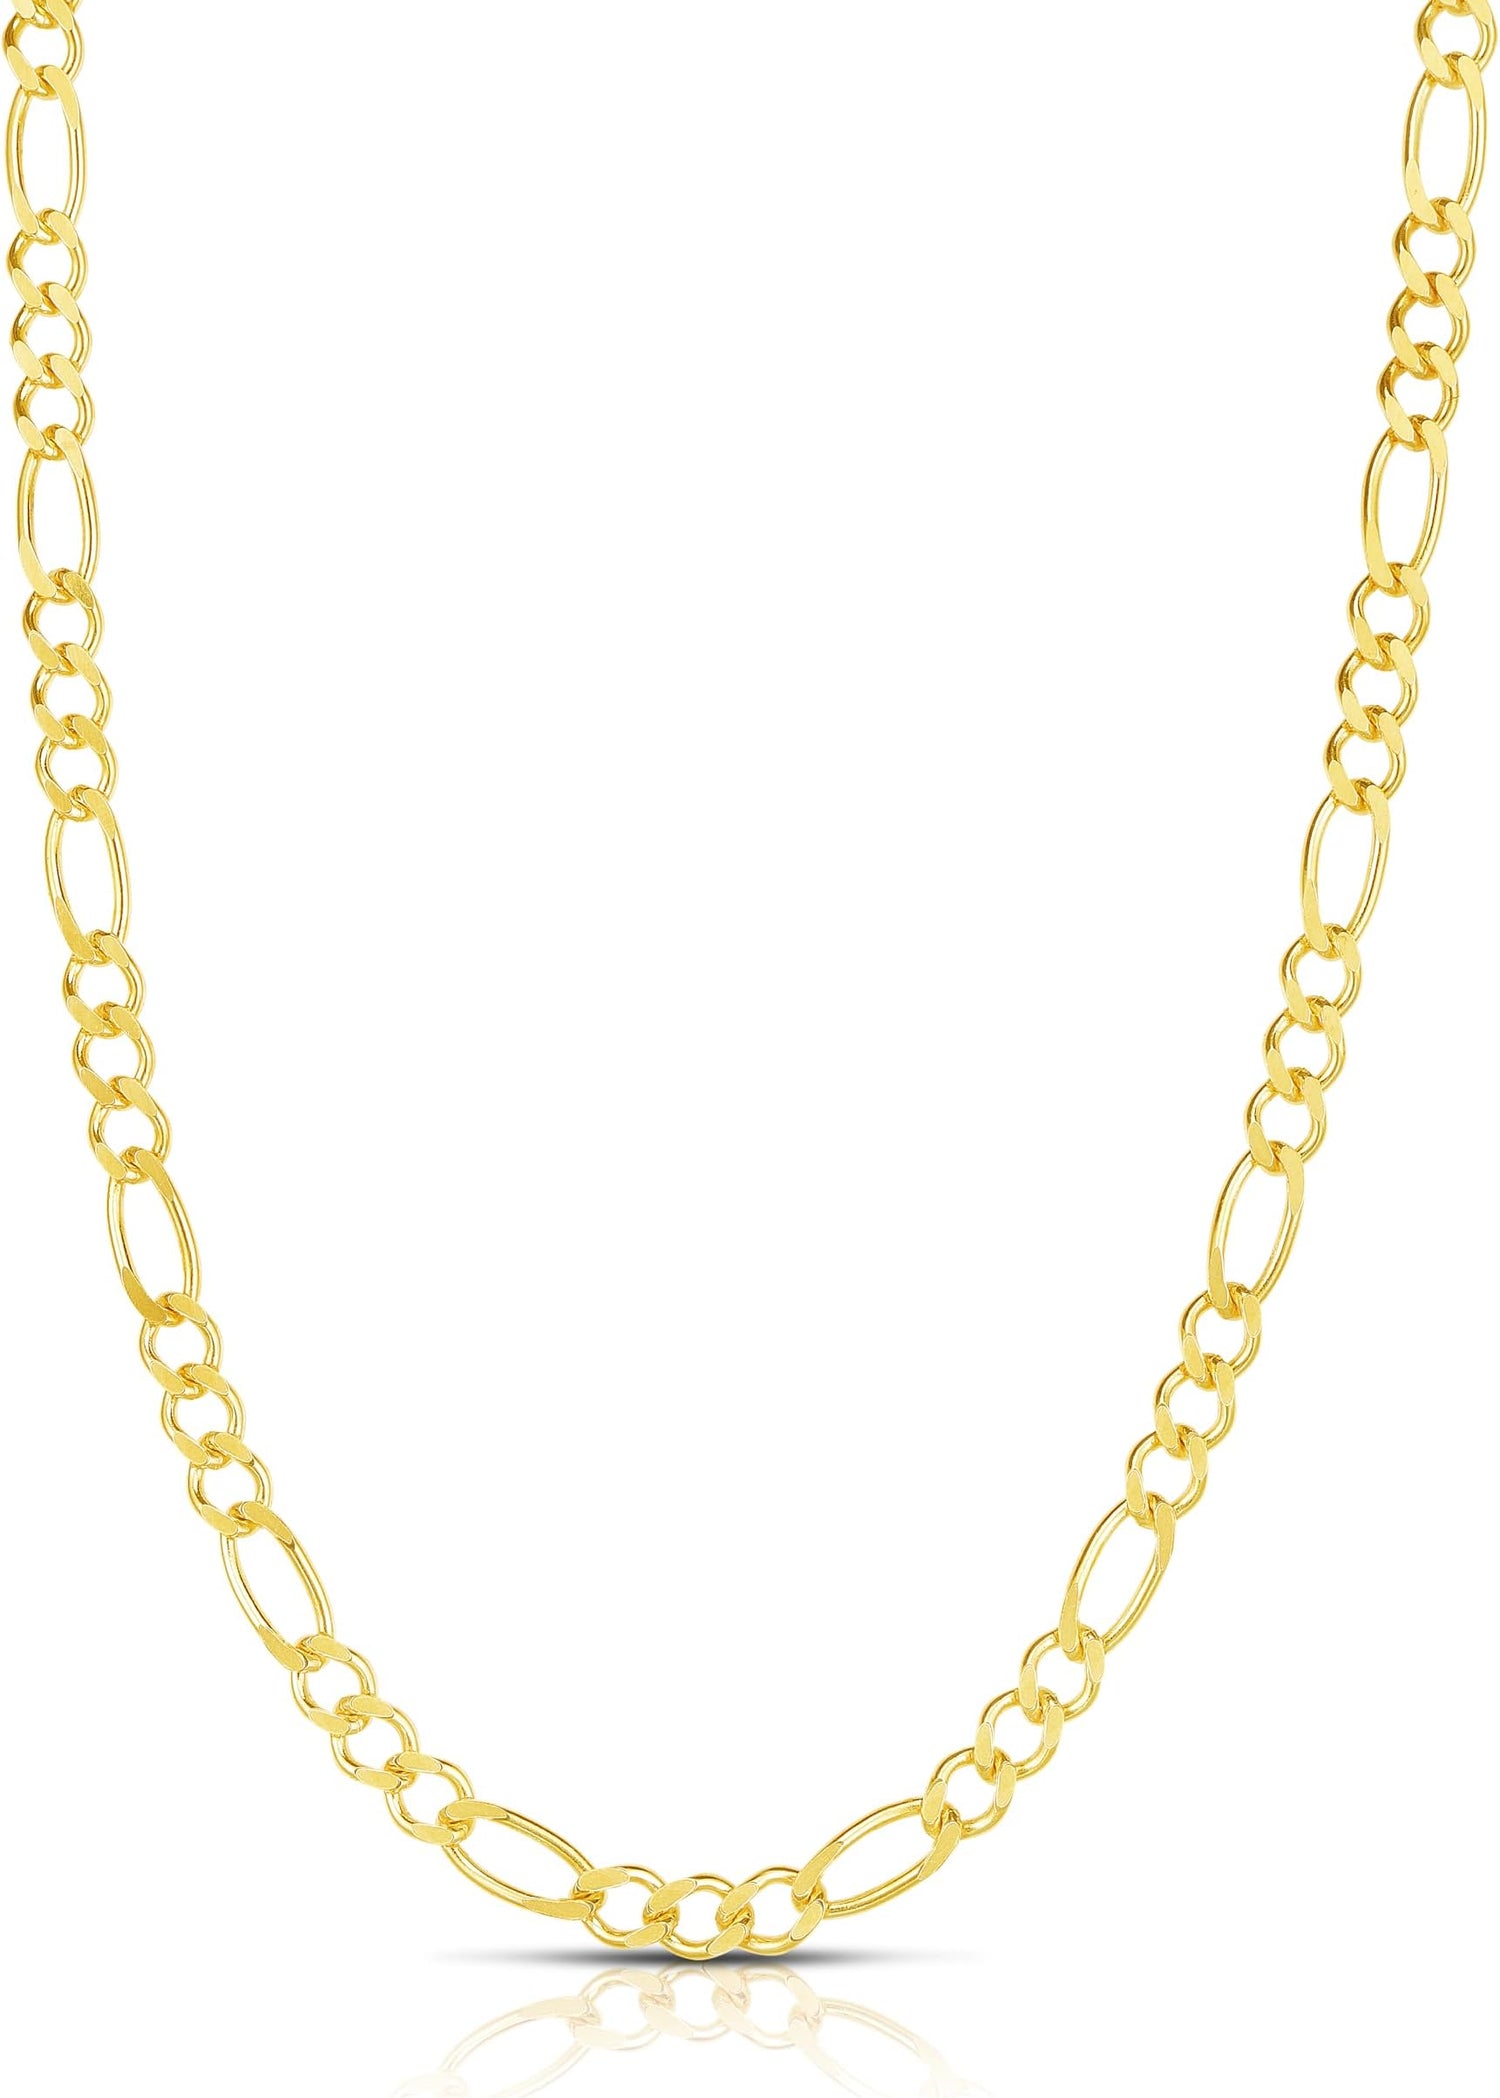 14k Yellow Gold  or White Gold 3mm Solid Figaro Chain Necklace